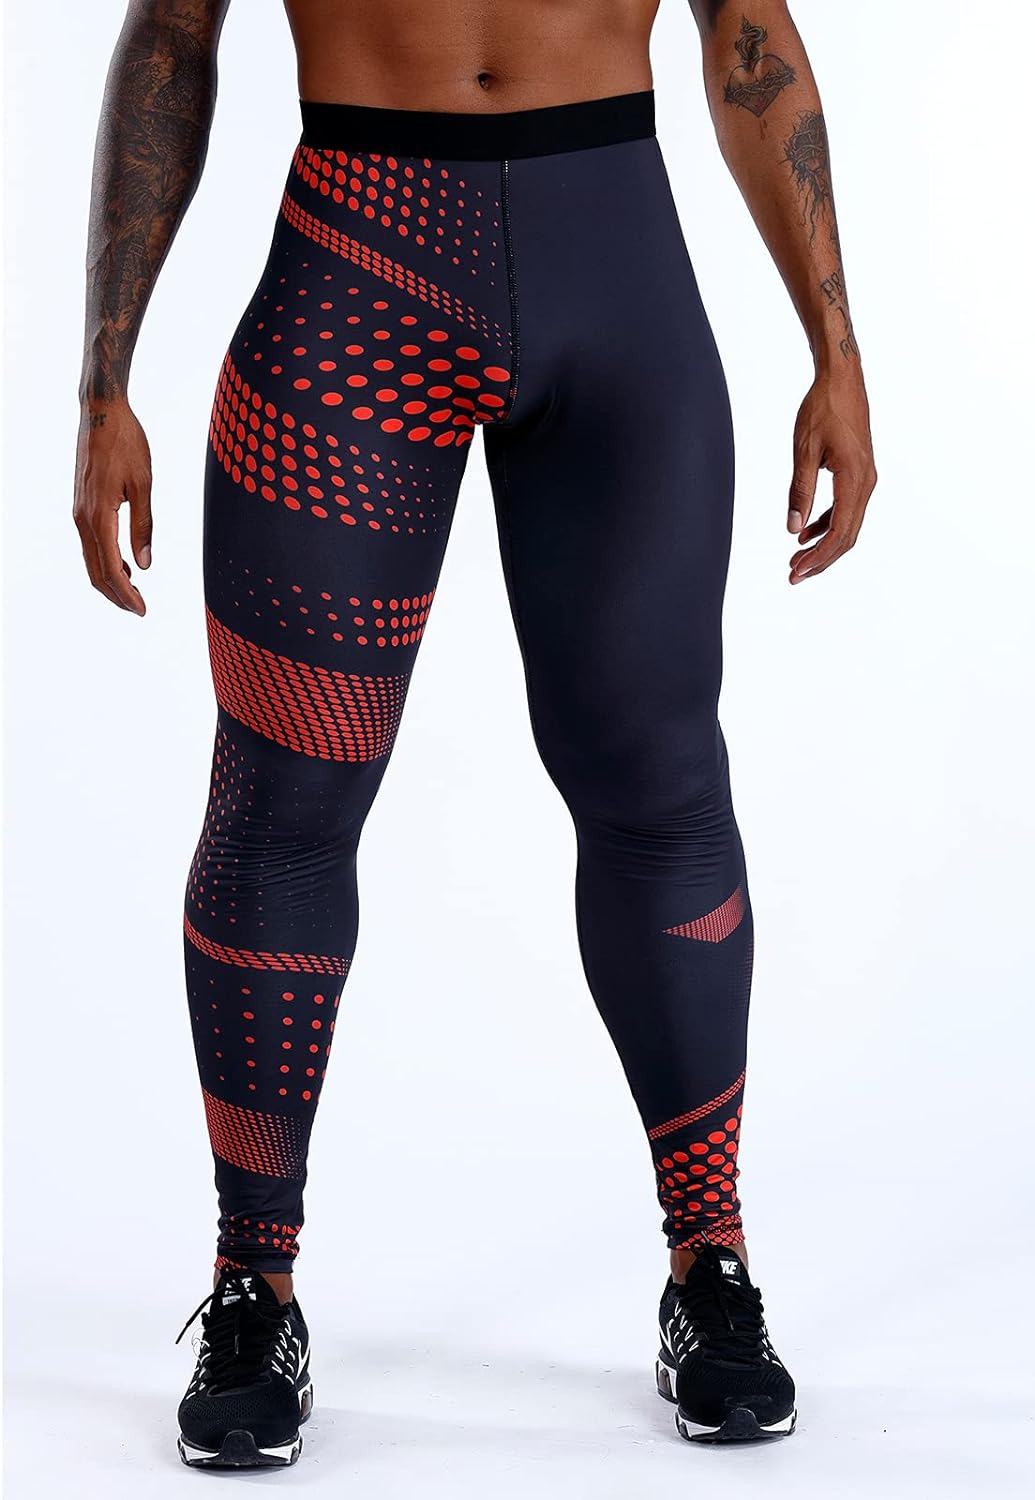 saraca core Men Youth Compression Pants Thermal Leggings Running Base Layers Workout Tights Cool Dry Keep Warm